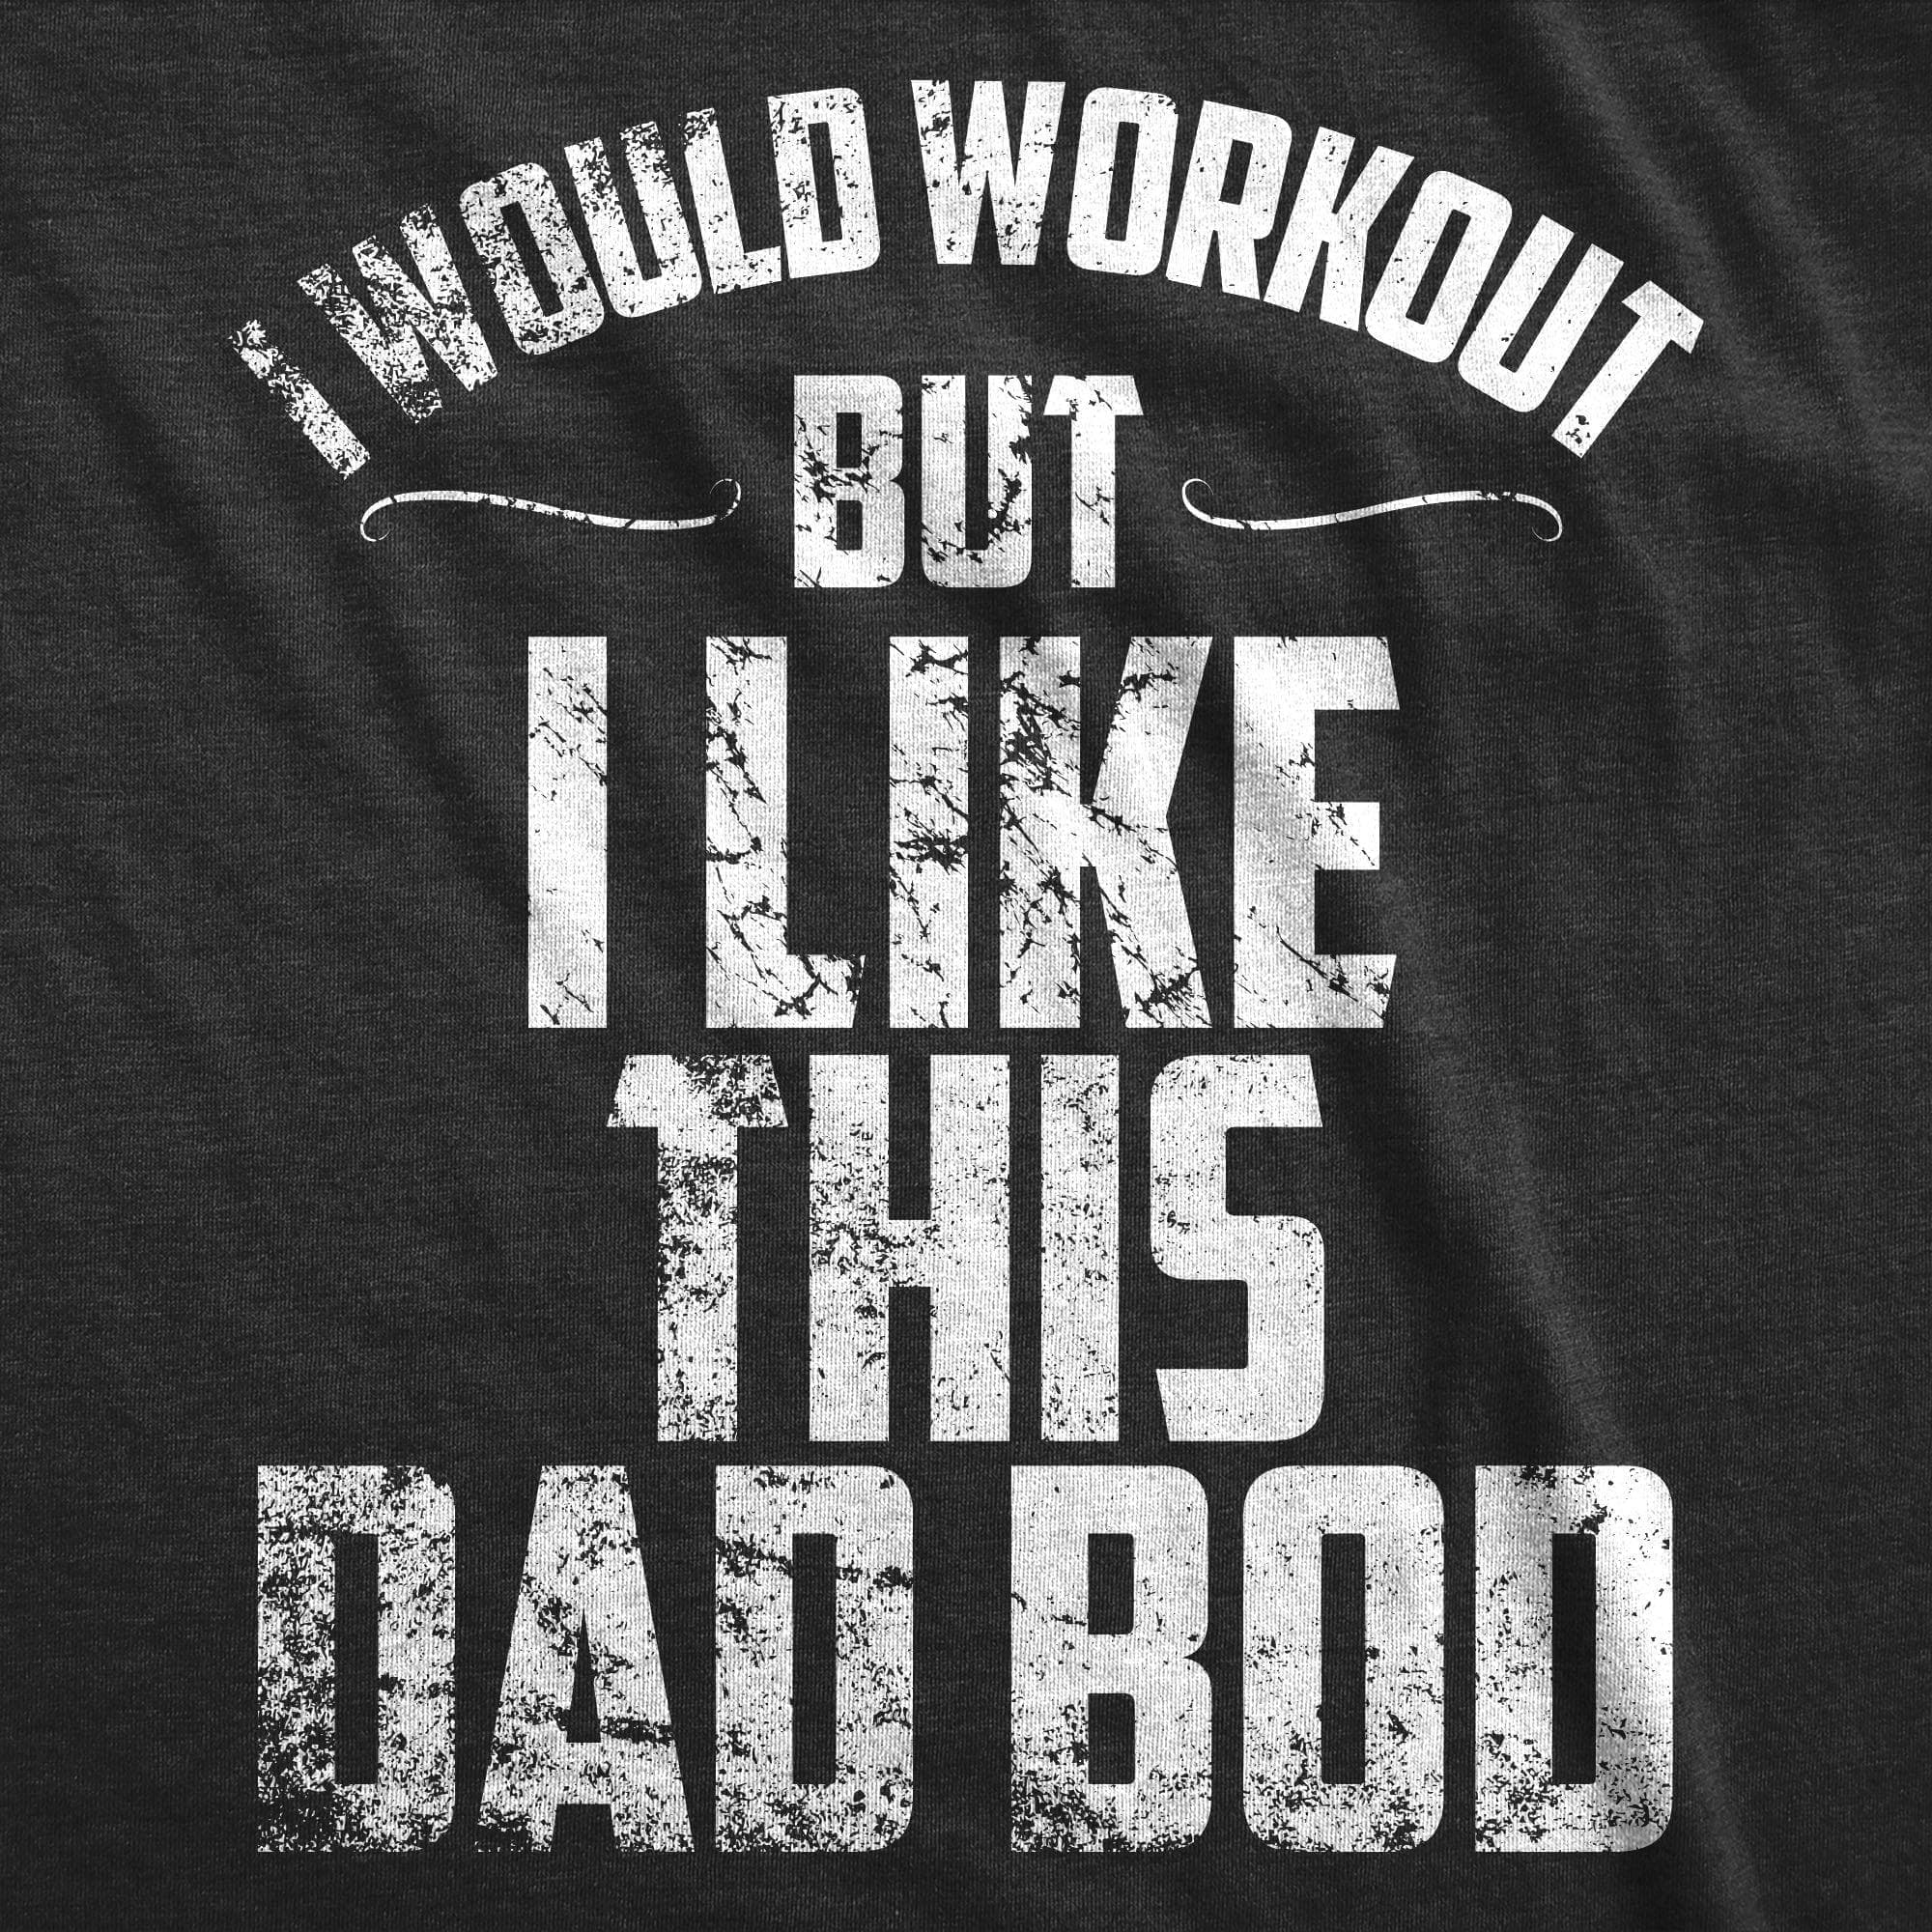 I Would Workout But I Like This Dad Bod Men's Tshirt  -  Crazy Dog T-Shirts